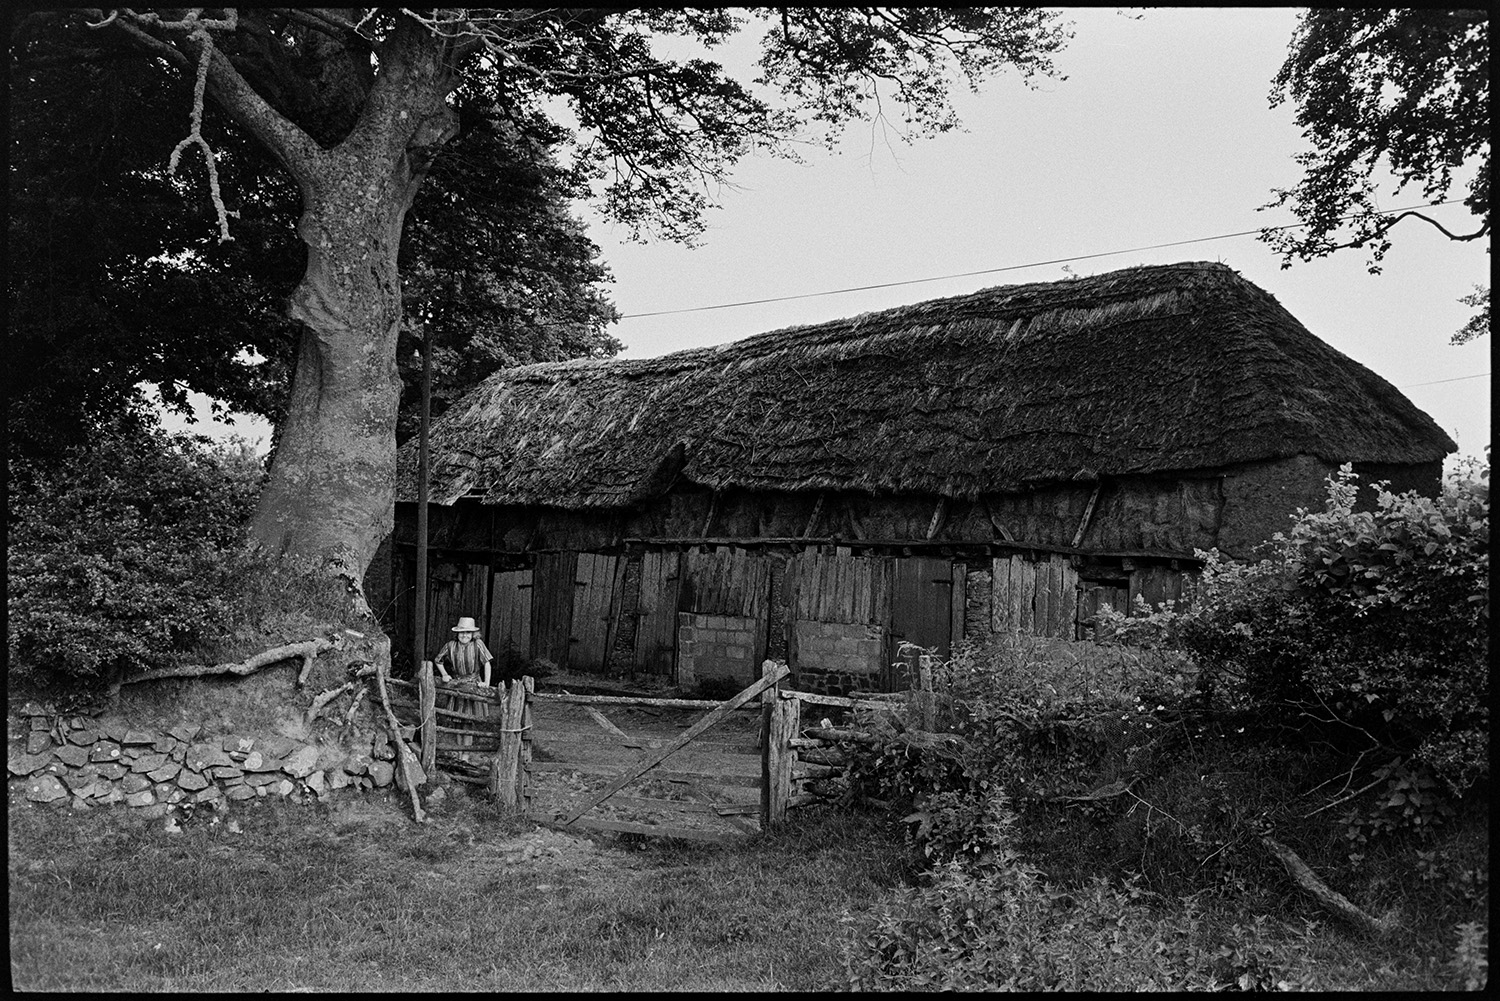 Old thatched barn, extremely interesting. 
[A girl climbing on a wooden gate in front of a stone and thatch barn at Deckport, Hatherleigh. Hay bales can be seen in the barn, which is surrounded by trees. The bottom part of the barn is covered with sheets of wood and corrugated iron.]